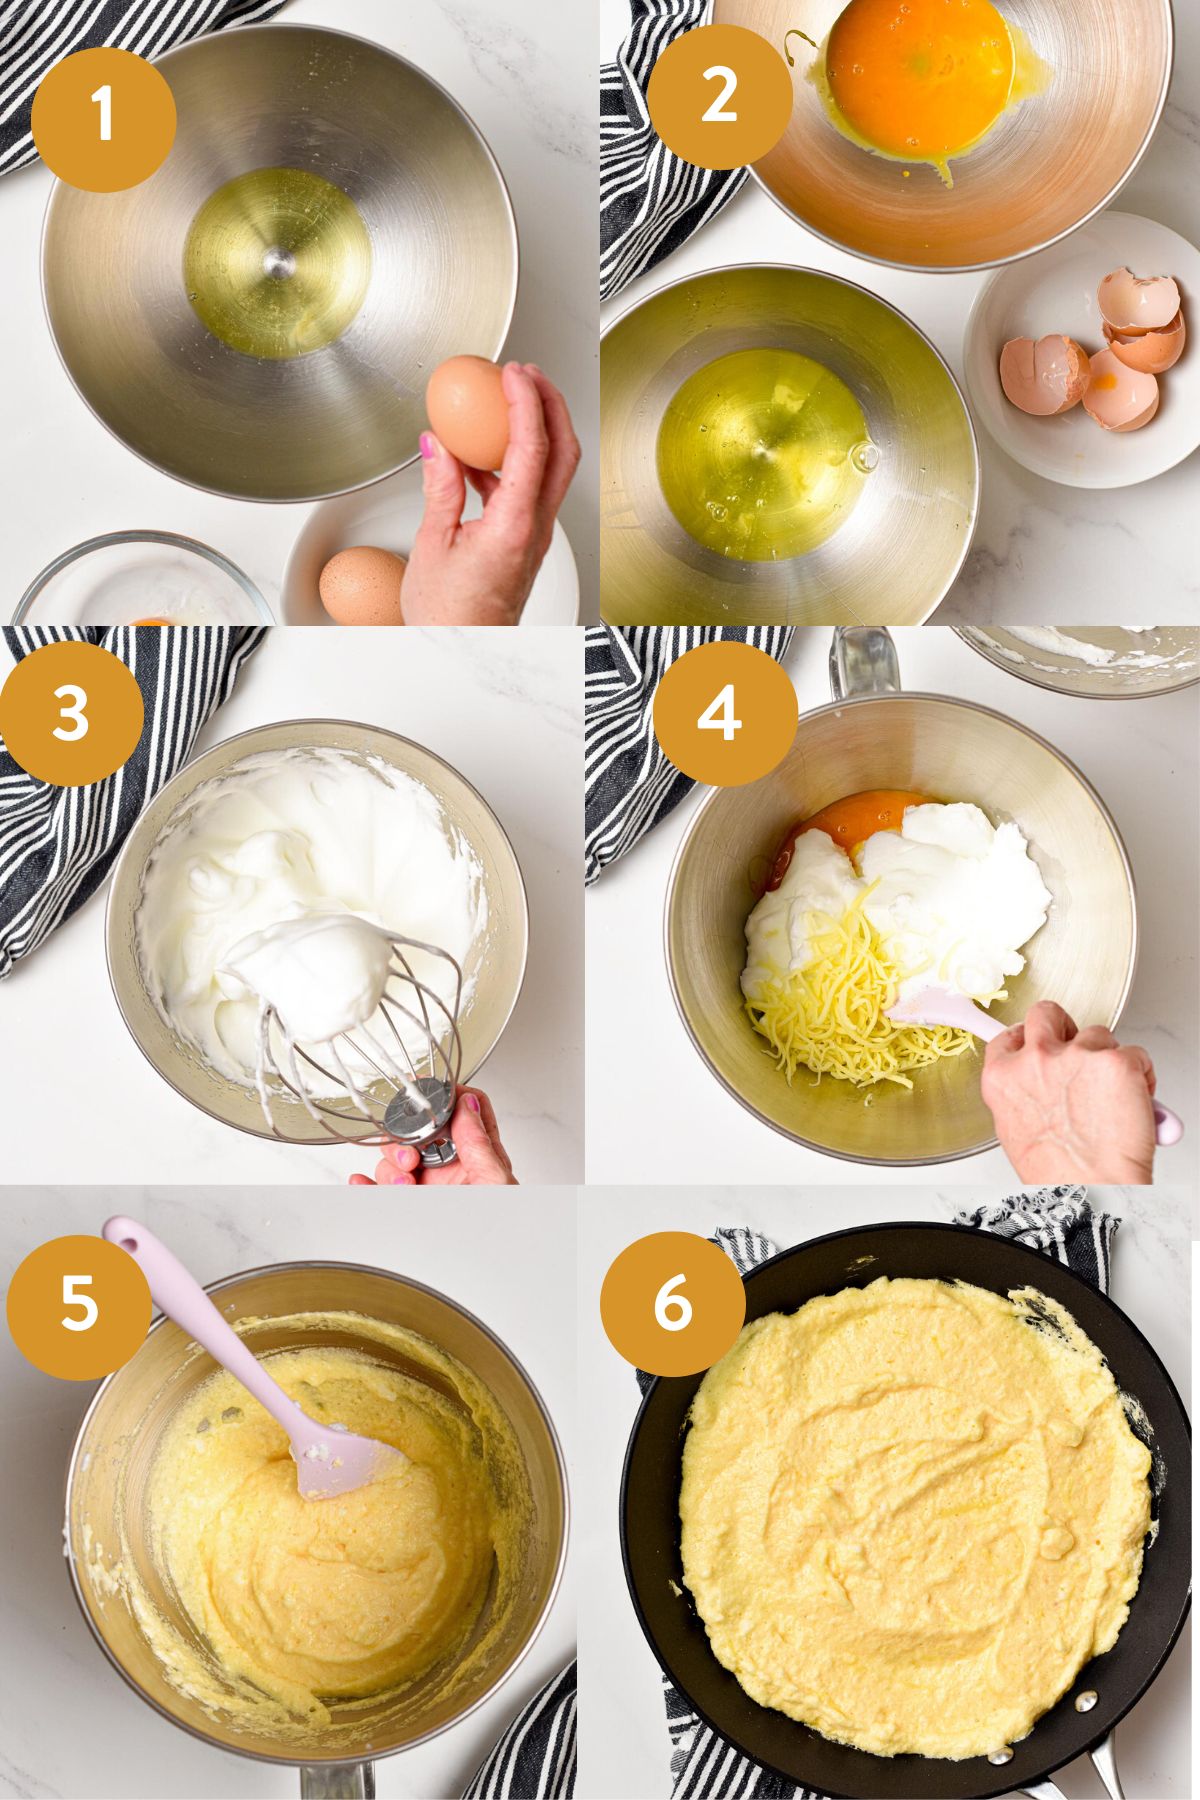 How to make Souffle Omelette